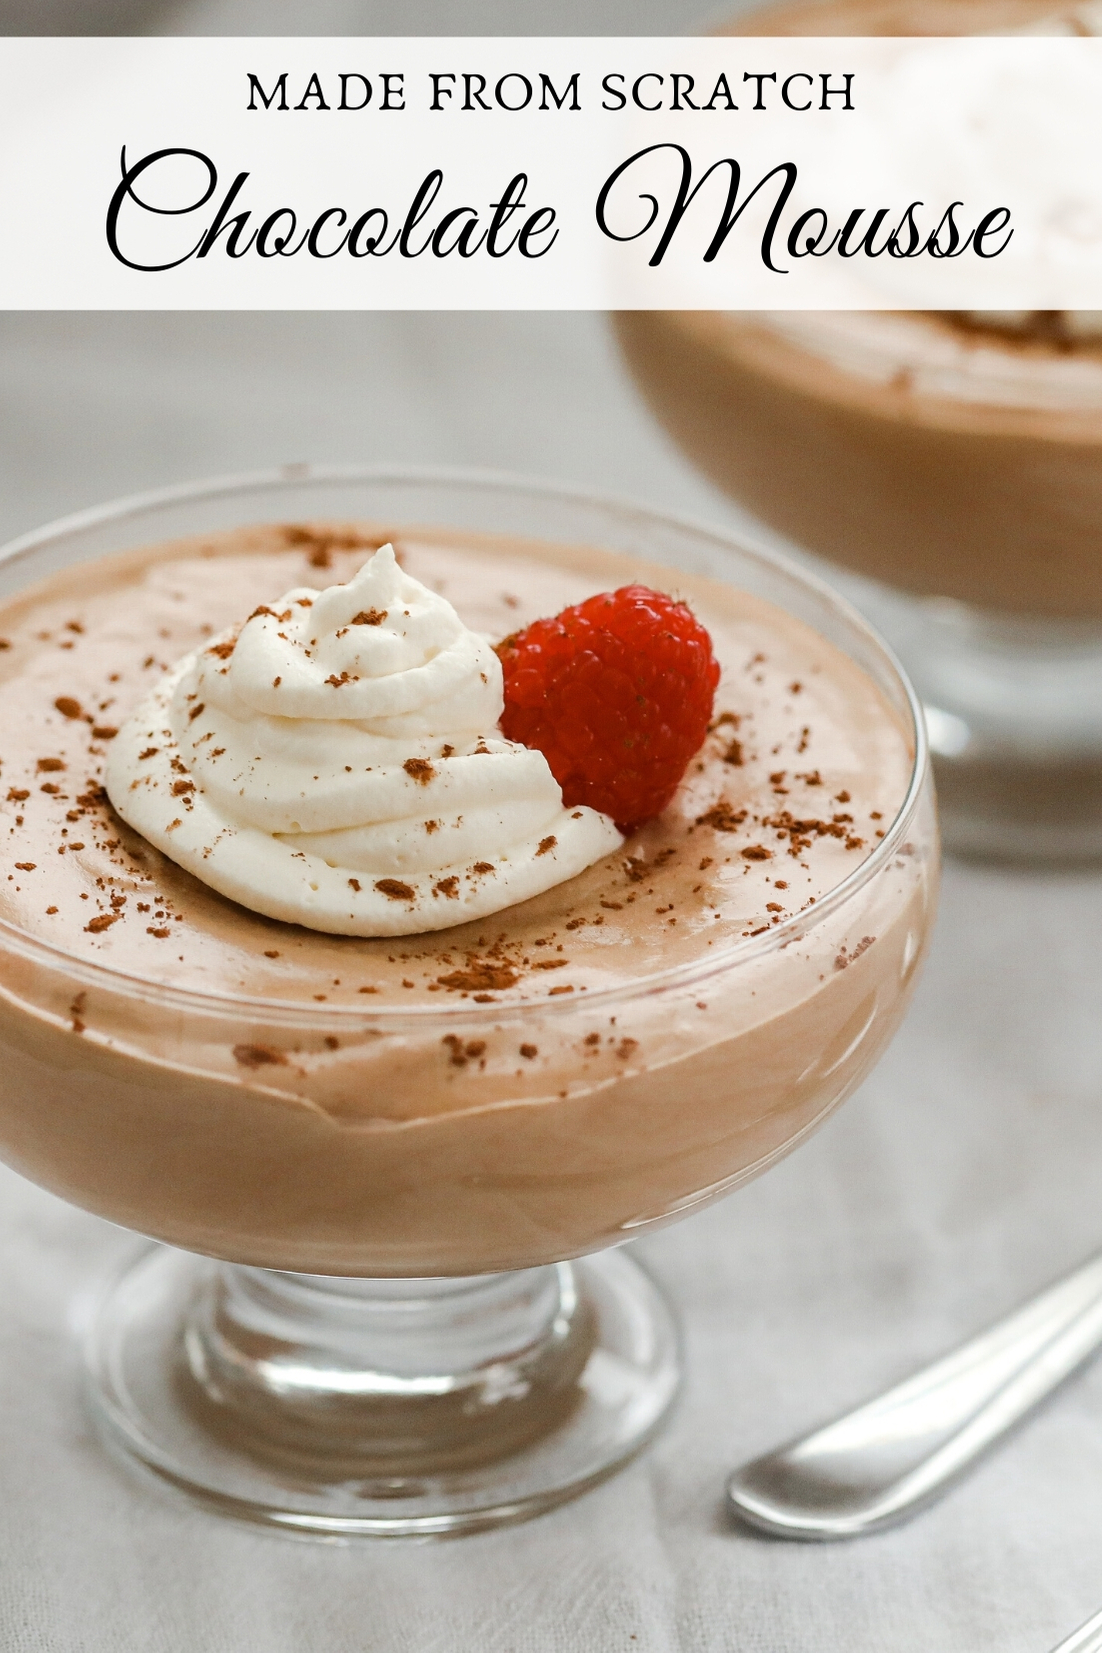 Made from scratch chocolate mousse recipe